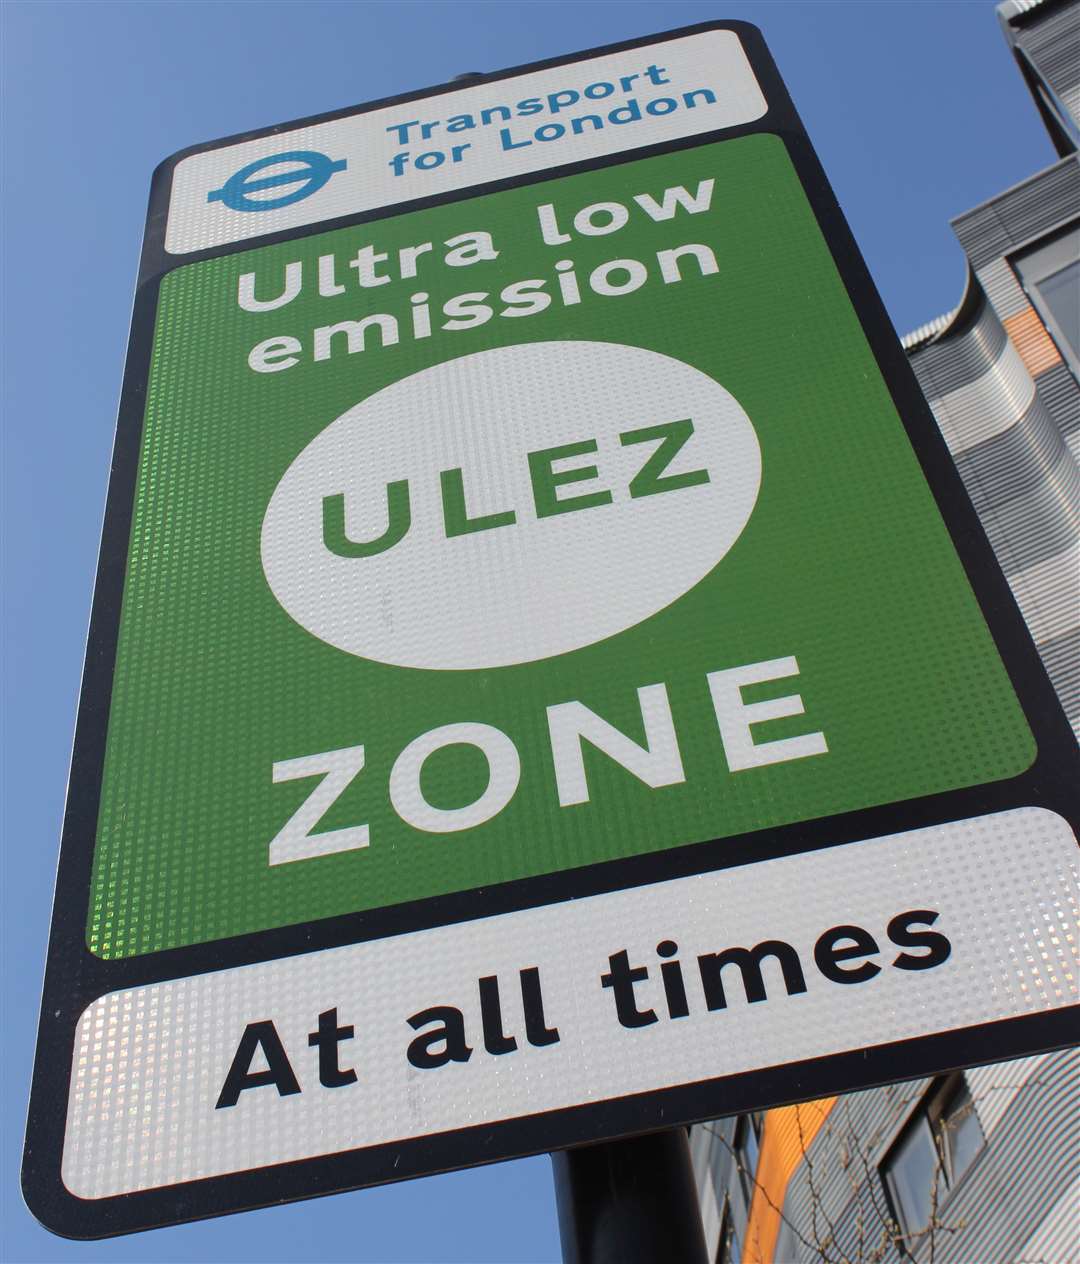 To help clear up London's air, the Ultra Low Emission Zone (ULEZ) operates 24 hours a day, seven days a week, every day of the year, except Christmas Day